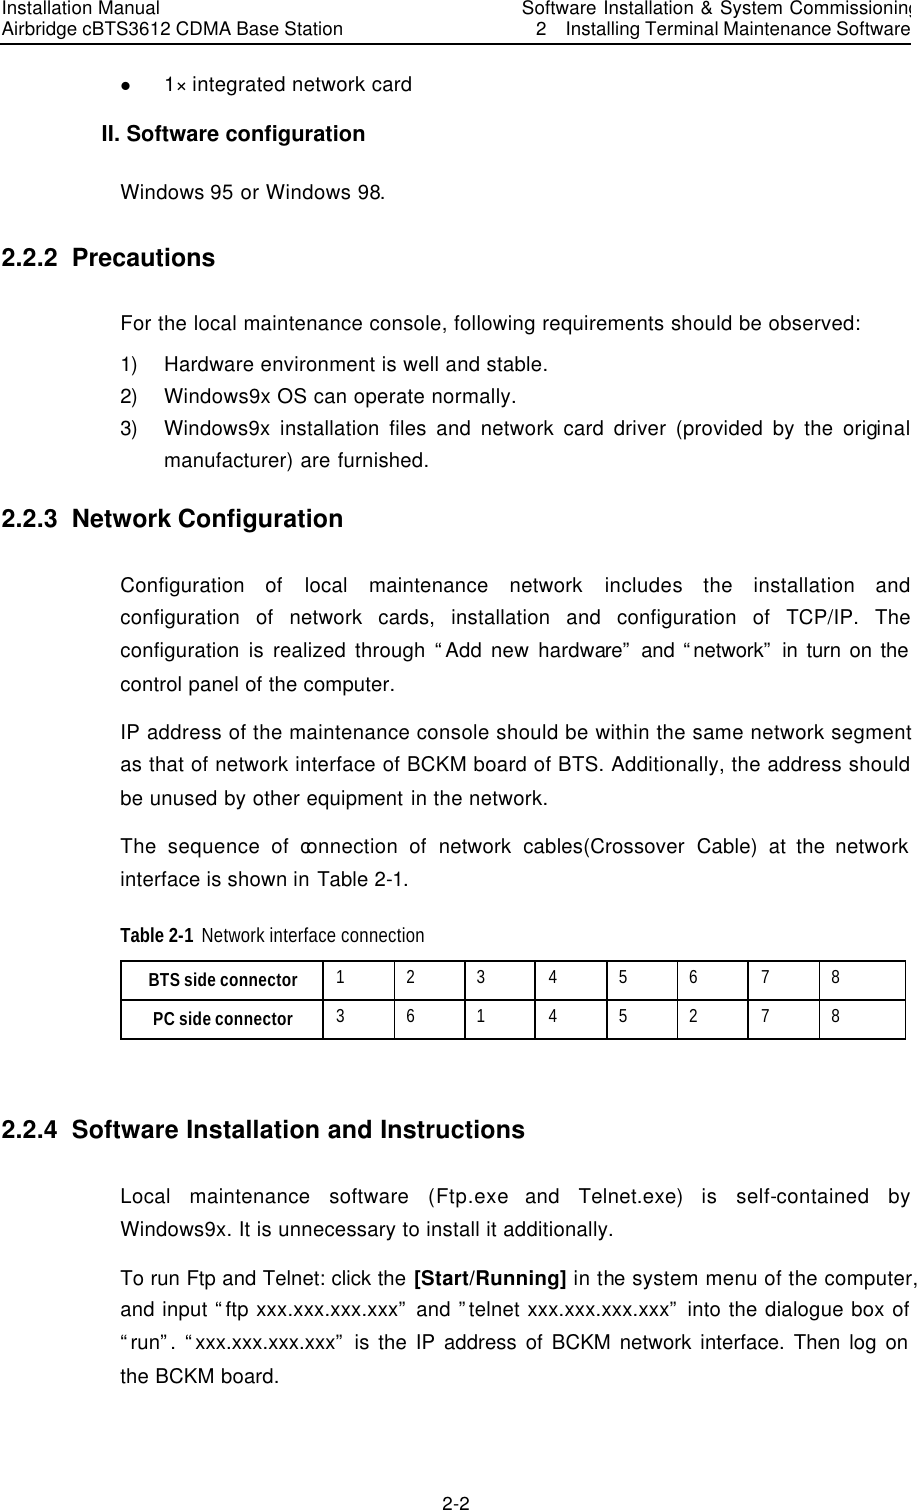 Installation Manual   Airbridge cBTS3612 CDMA Base Station  　Software Installation &amp; System Commissioning   2  Installing Terminal Maintenance Software　2-2　l 1× integrated network card   II. Software configuration   Windows 95 or Windows 98. 2.2.2  Precautions For the local maintenance console, following requirements should be observed: 1) Hardware environment is well and stable. 2) Windows9x OS can operate normally.   3) Windows9x installation files and network card driver (provided by the original manufacturer) are furnished. 2.2.3  Network Configuration Configuration of local maintenance network includes the installation and configuration of network cards, installation and configuration of TCP/IP. The configuration is realized through “Add new hardware” and “network” in turn on the control panel of the computer. IP address of the maintenance console should be within the same network segment as that of network interface of BCKM board of BTS. Additionally, the address should be unused by other equipment in the network. The sequence of connection  of network cables(Crossover Cable) at the network interface is shown in Table 2-1. Table 2-1 Network interface connection   BTS side connector   1 2 3 4 5 6 7 8 PC side connector   3 6 1 4 5 2 7 8  2.2.4  Software Installation and Instructions  Local maintenance software (Ftp.exe and Telnet.exe) is self-contained by Windows9x. It is unnecessary to install it additionally. To run Ftp and Telnet: click the [Start/Running] in the system menu of the computer, and input “ftp xxx.xxx.xxx.xxx” and ”telnet xxx.xxx.xxx.xxx” into the dialogue box of “run”. “xxx.xxx.xxx.xxx” is the IP address of BCKM network interface. Then log on the BCKM board. 